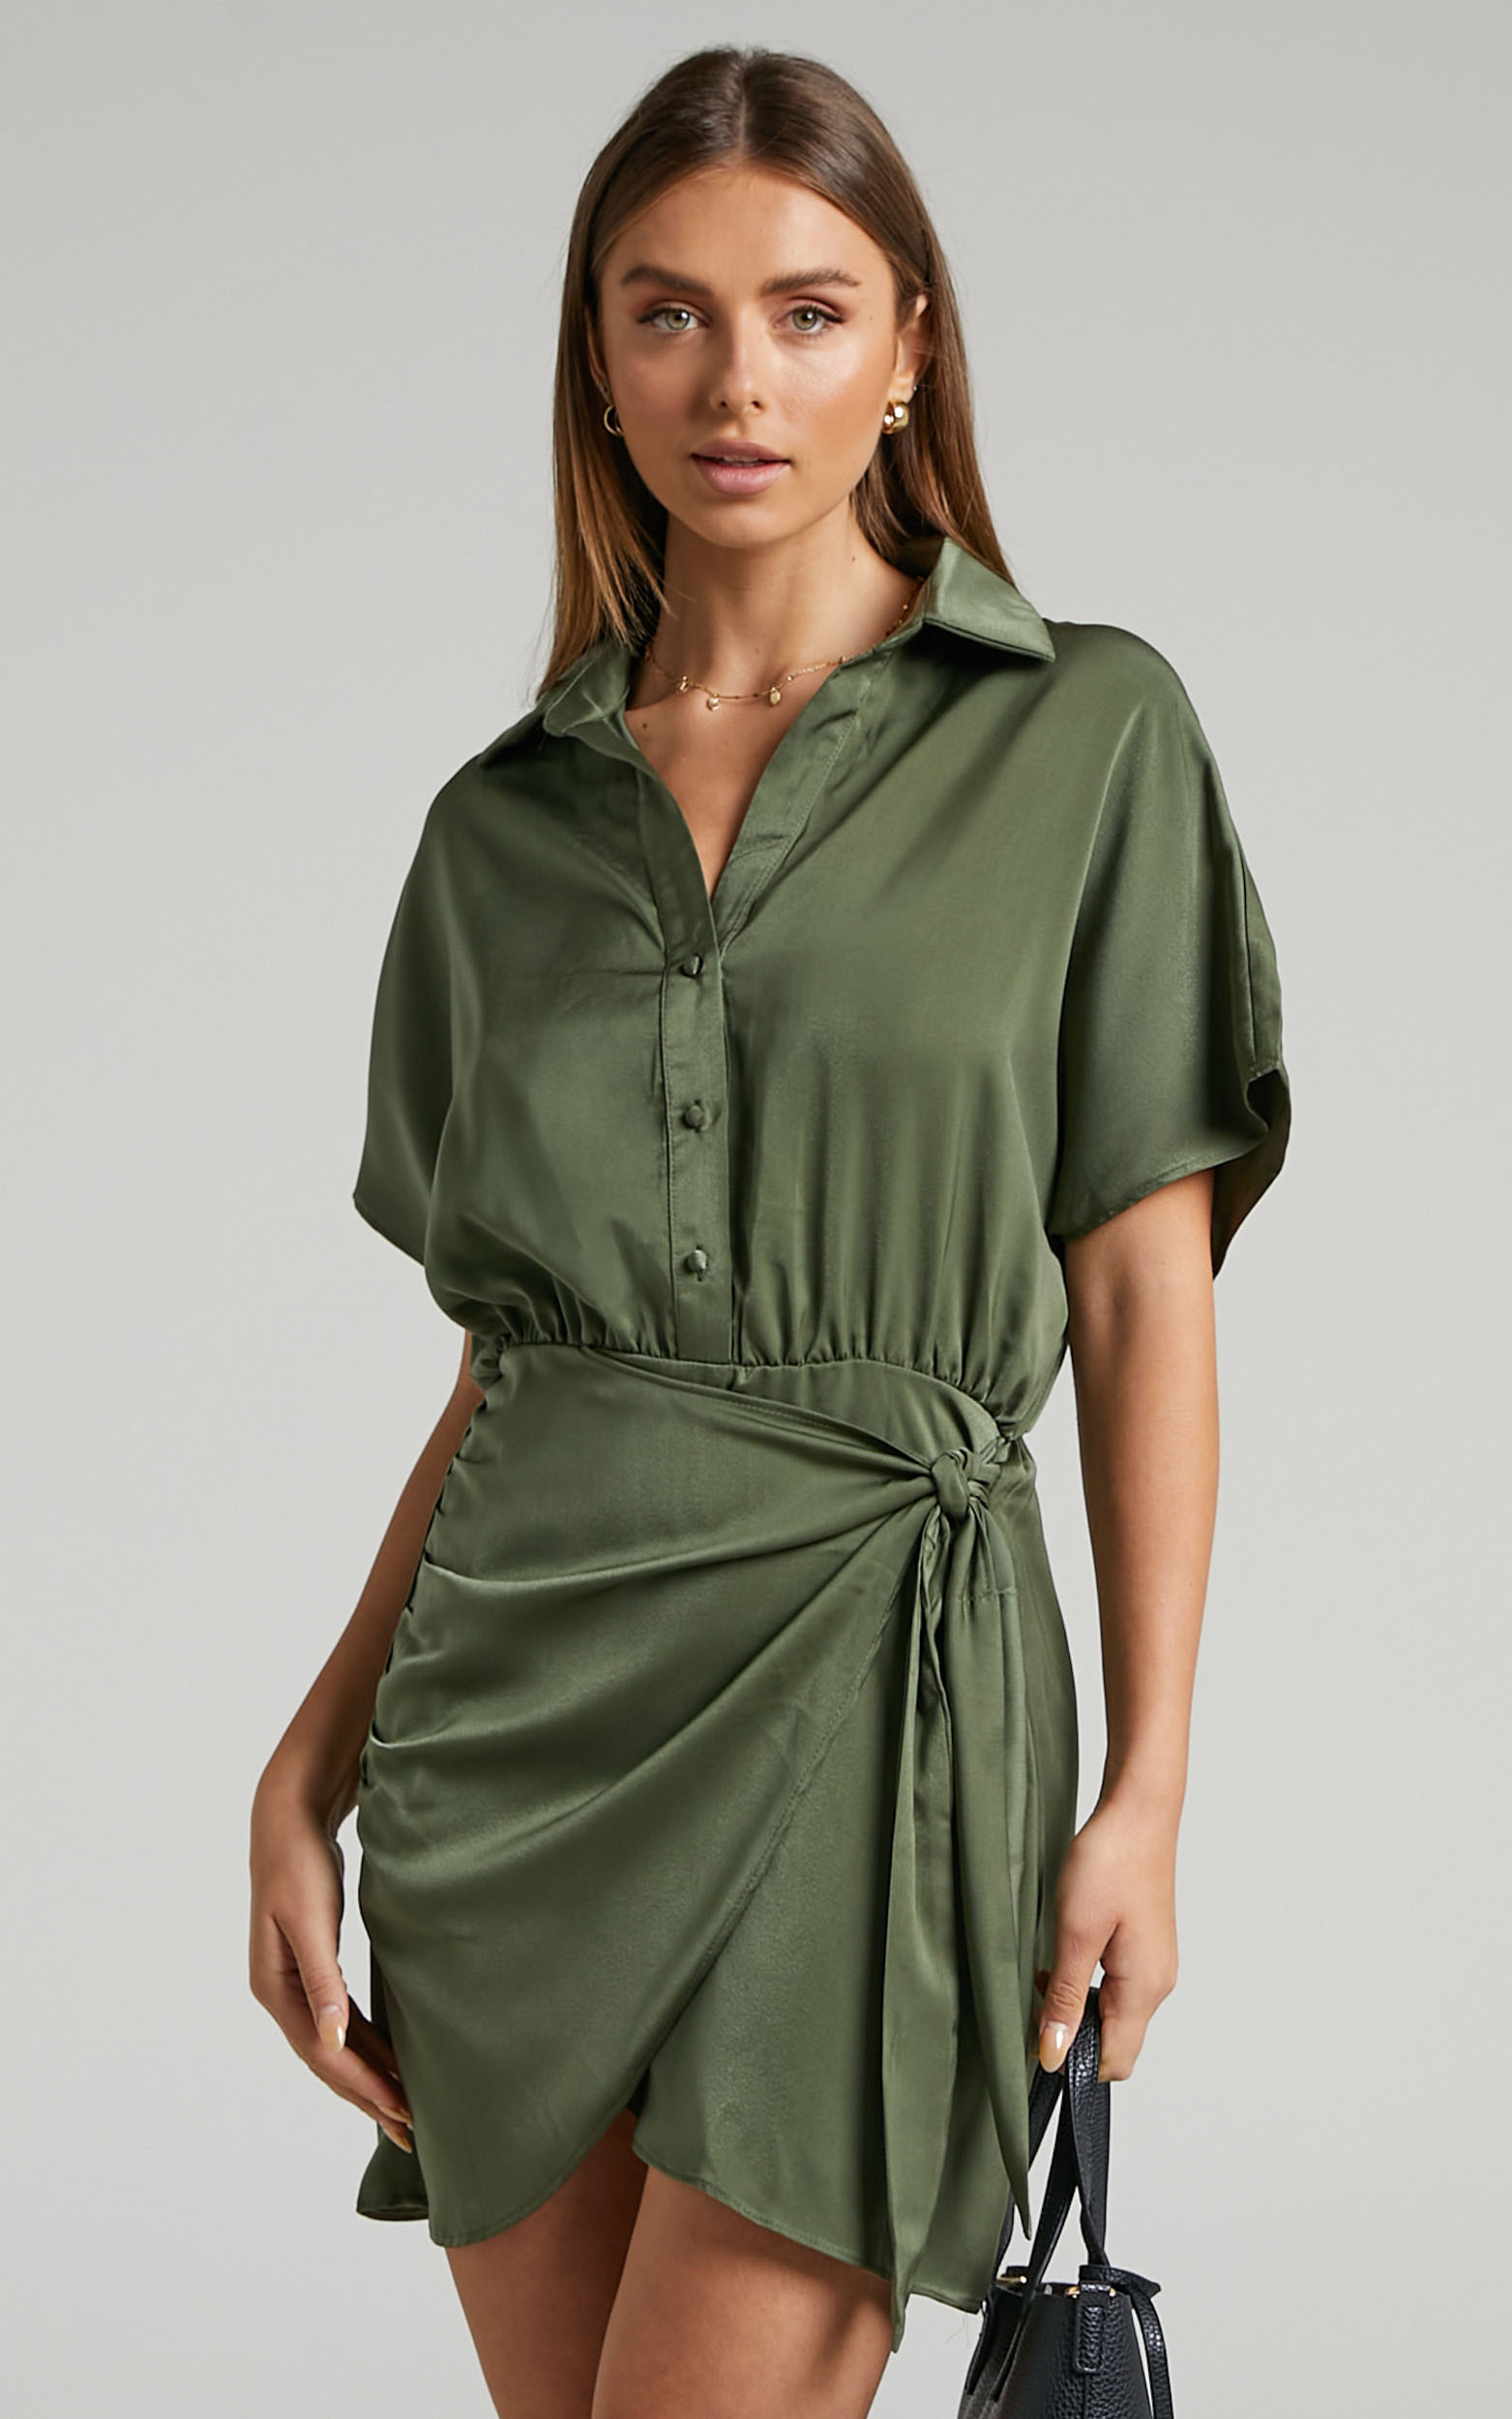 Ameleth Collared Wrap Front Mini Dress in Olive - 04, GRN1, hi-res image number null